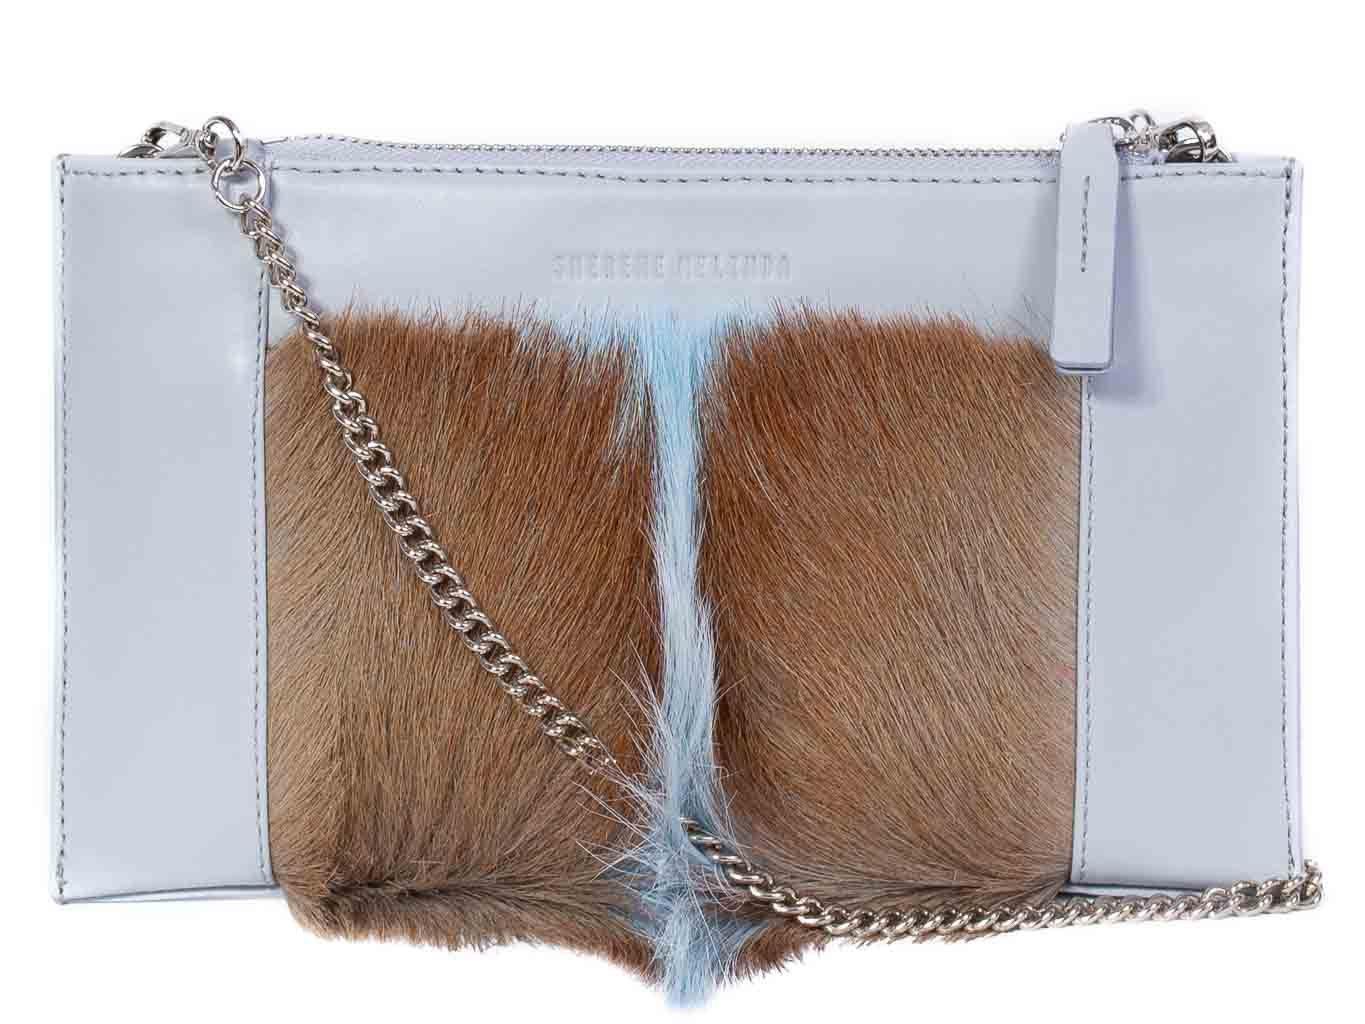 Clutch Springbok Handbag in Baby Blue with a fan feature by Sherene Melinda front strap